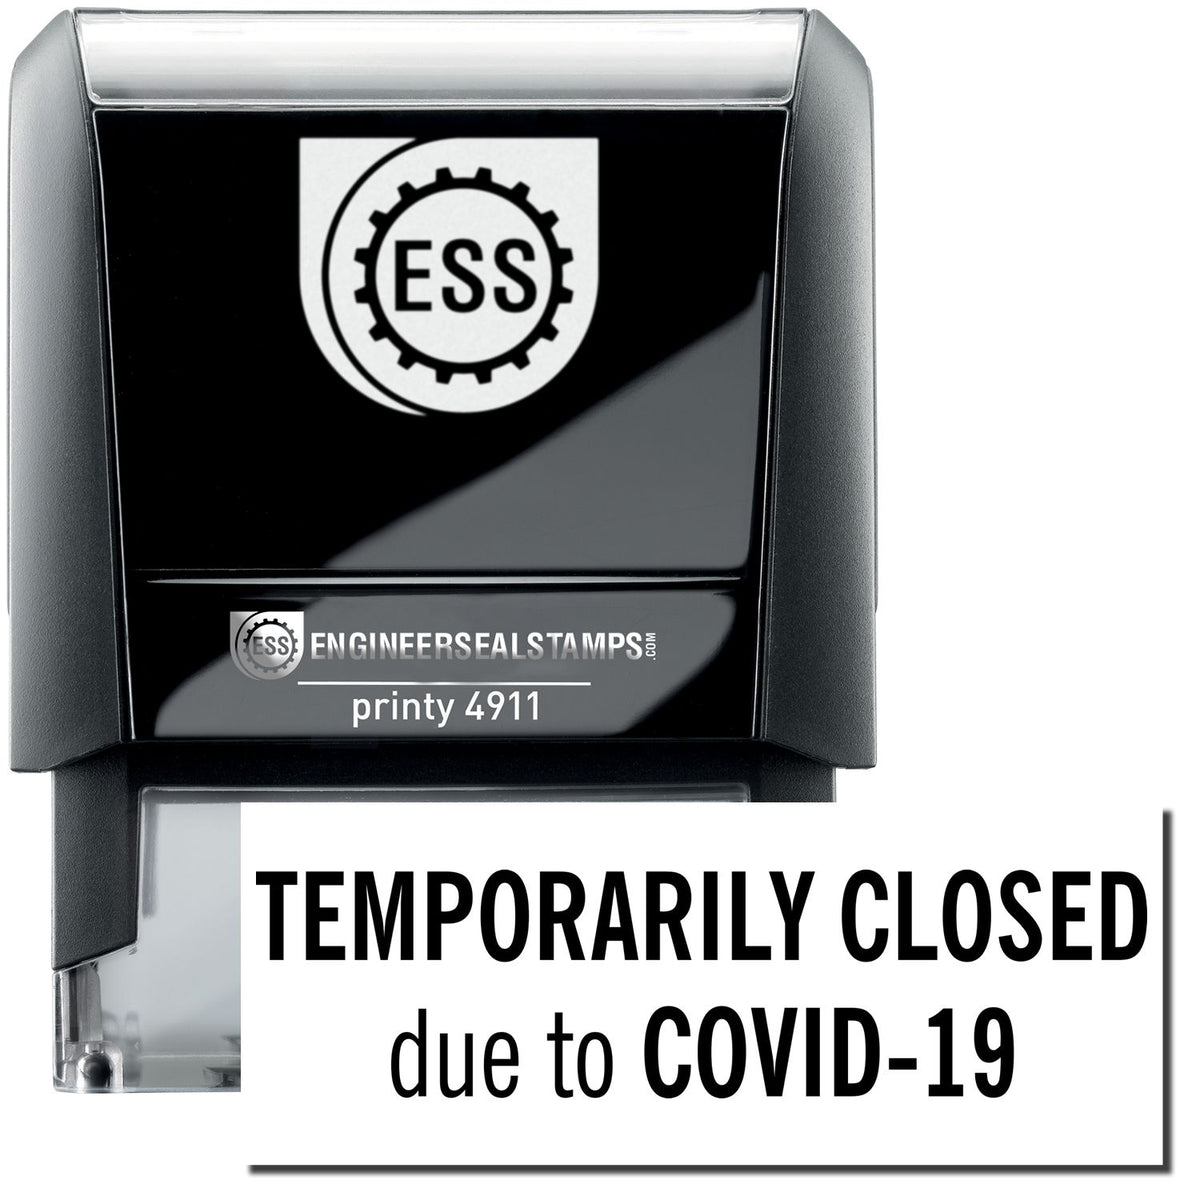 A self-inking stamp with a stamped image showing how the text &quot;TEMPORARILY CLOSED due to COVID-19&quot; is displayed after stamping.